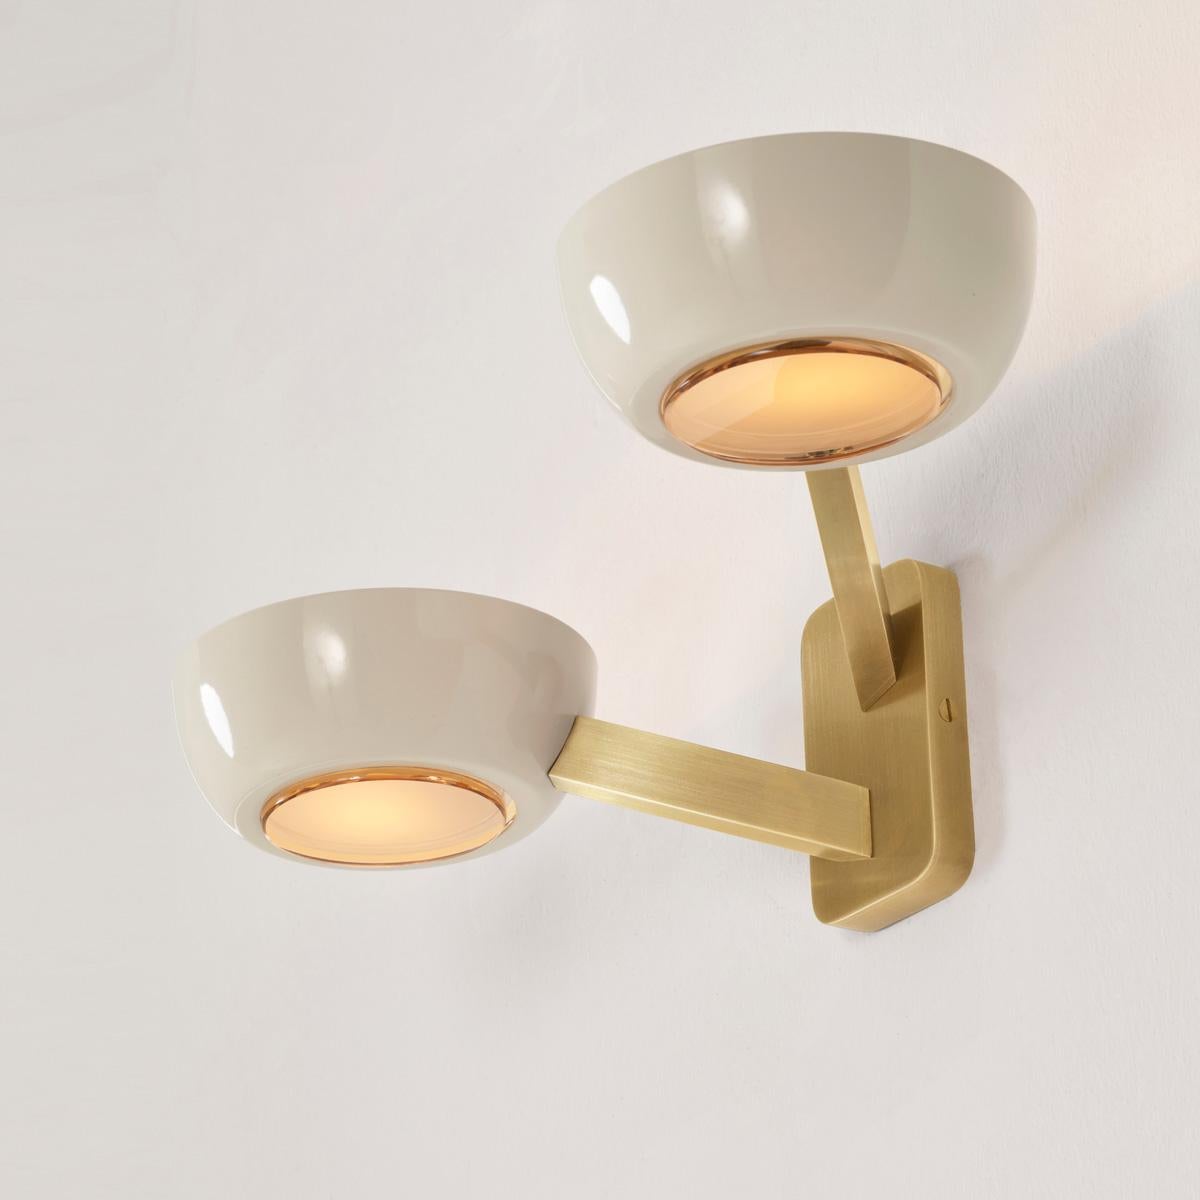 Brass Rose Double Wall Light by Gaspare Asaro. Bronze Finish. For Sale